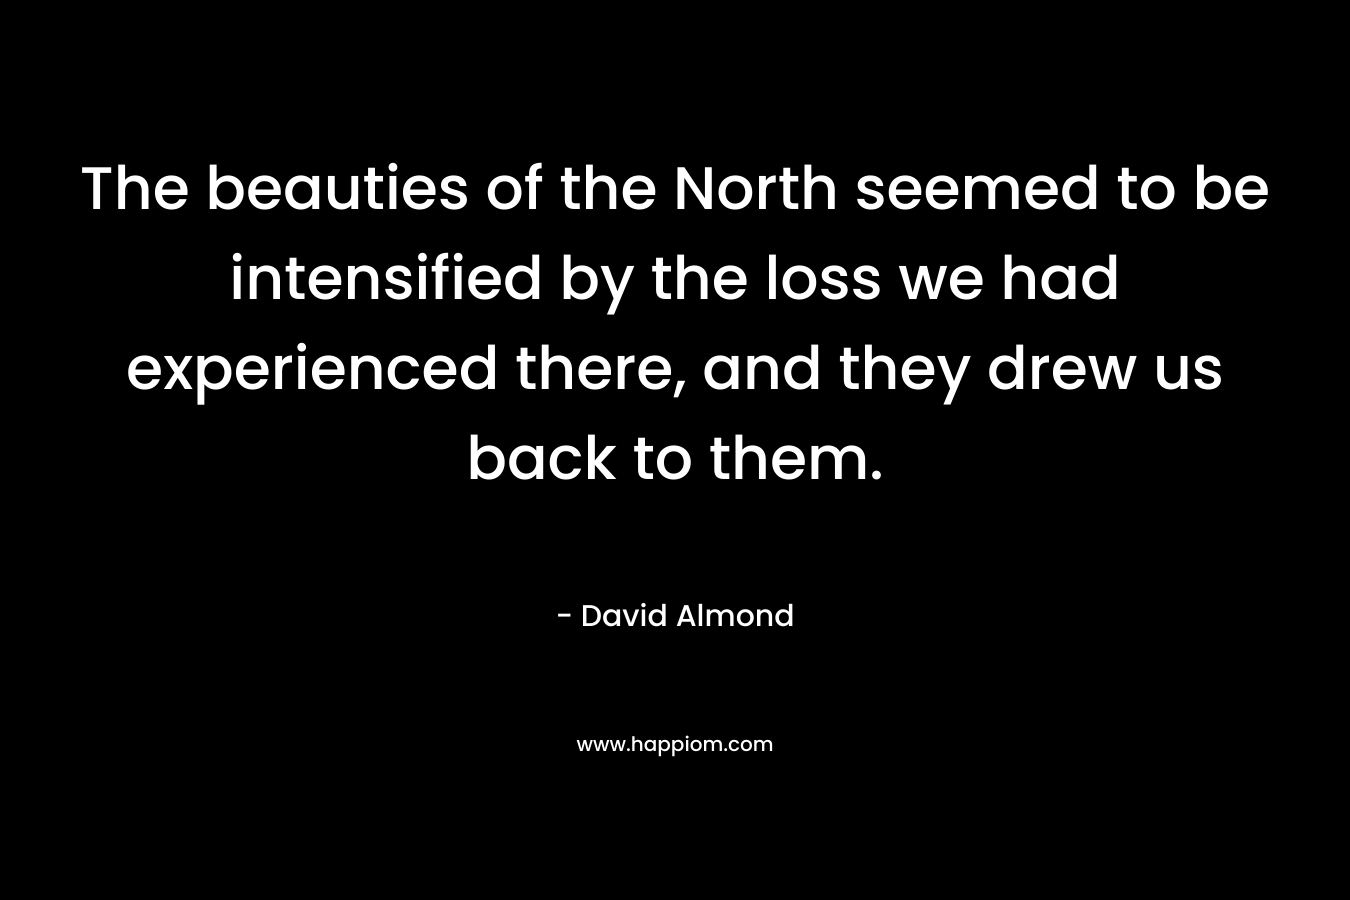 The beauties of the North seemed to be intensified by the loss we had experienced there, and they drew us back to them. – David Almond